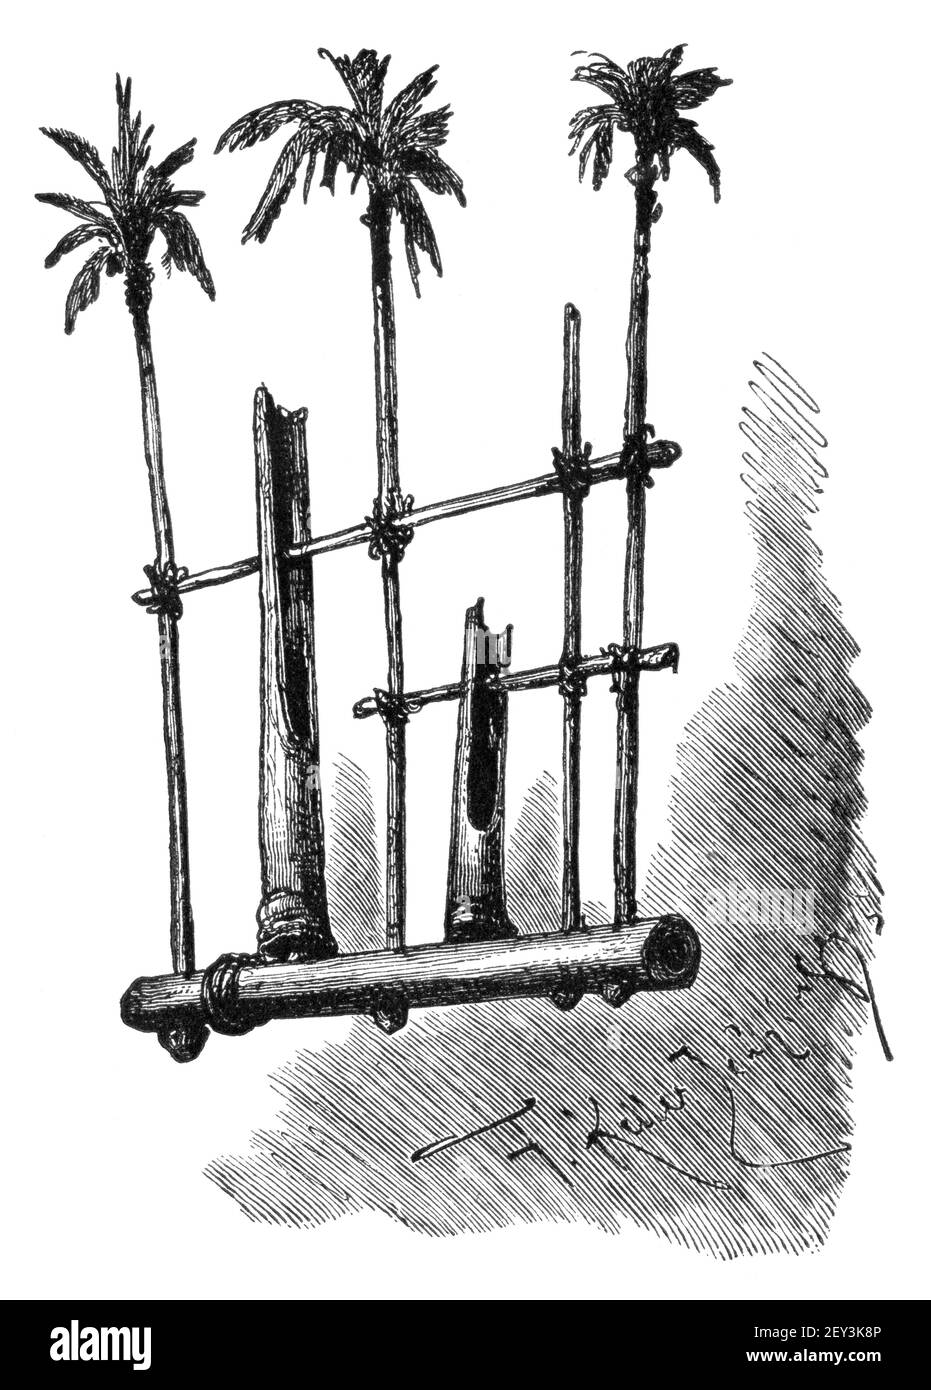 Anklung, Musical Instrument, West Java, Indonesia. Culture and history of Asia. Vintage antique black and white illustration. 19th century. Stock Photo